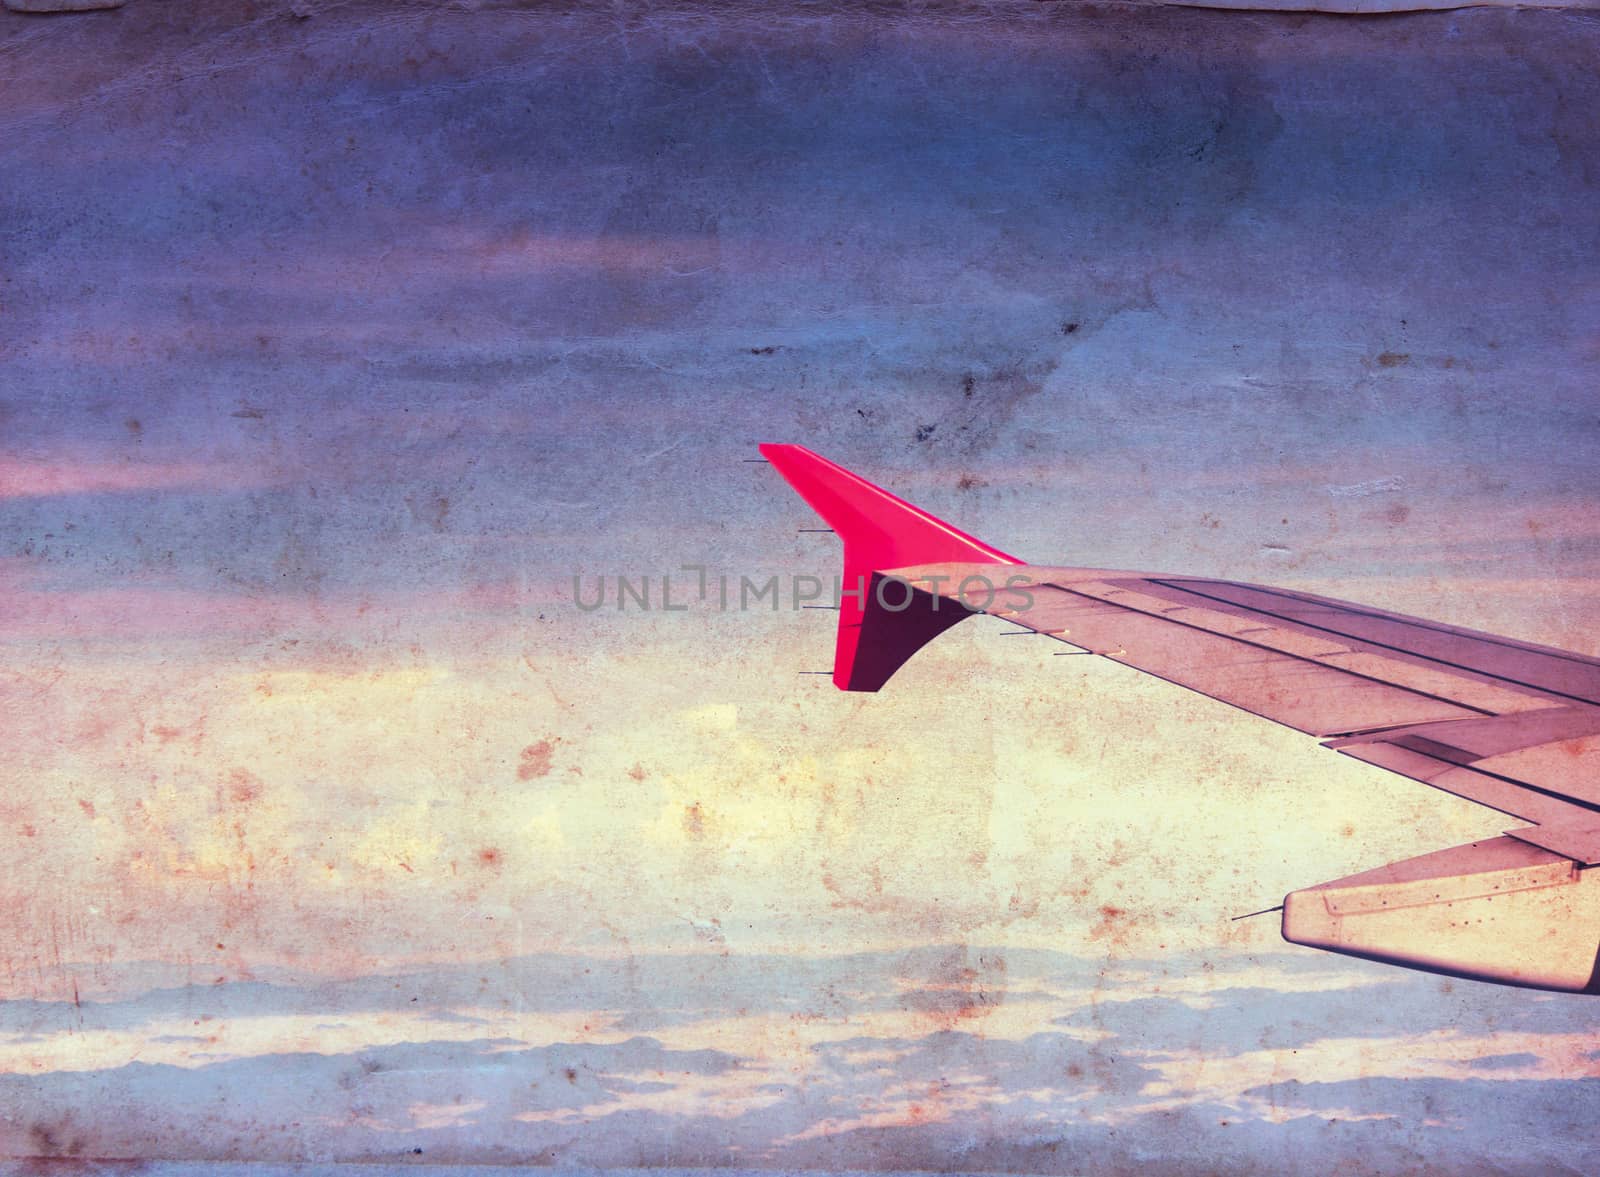 Wing of the plane over blue sky background, grunge style background